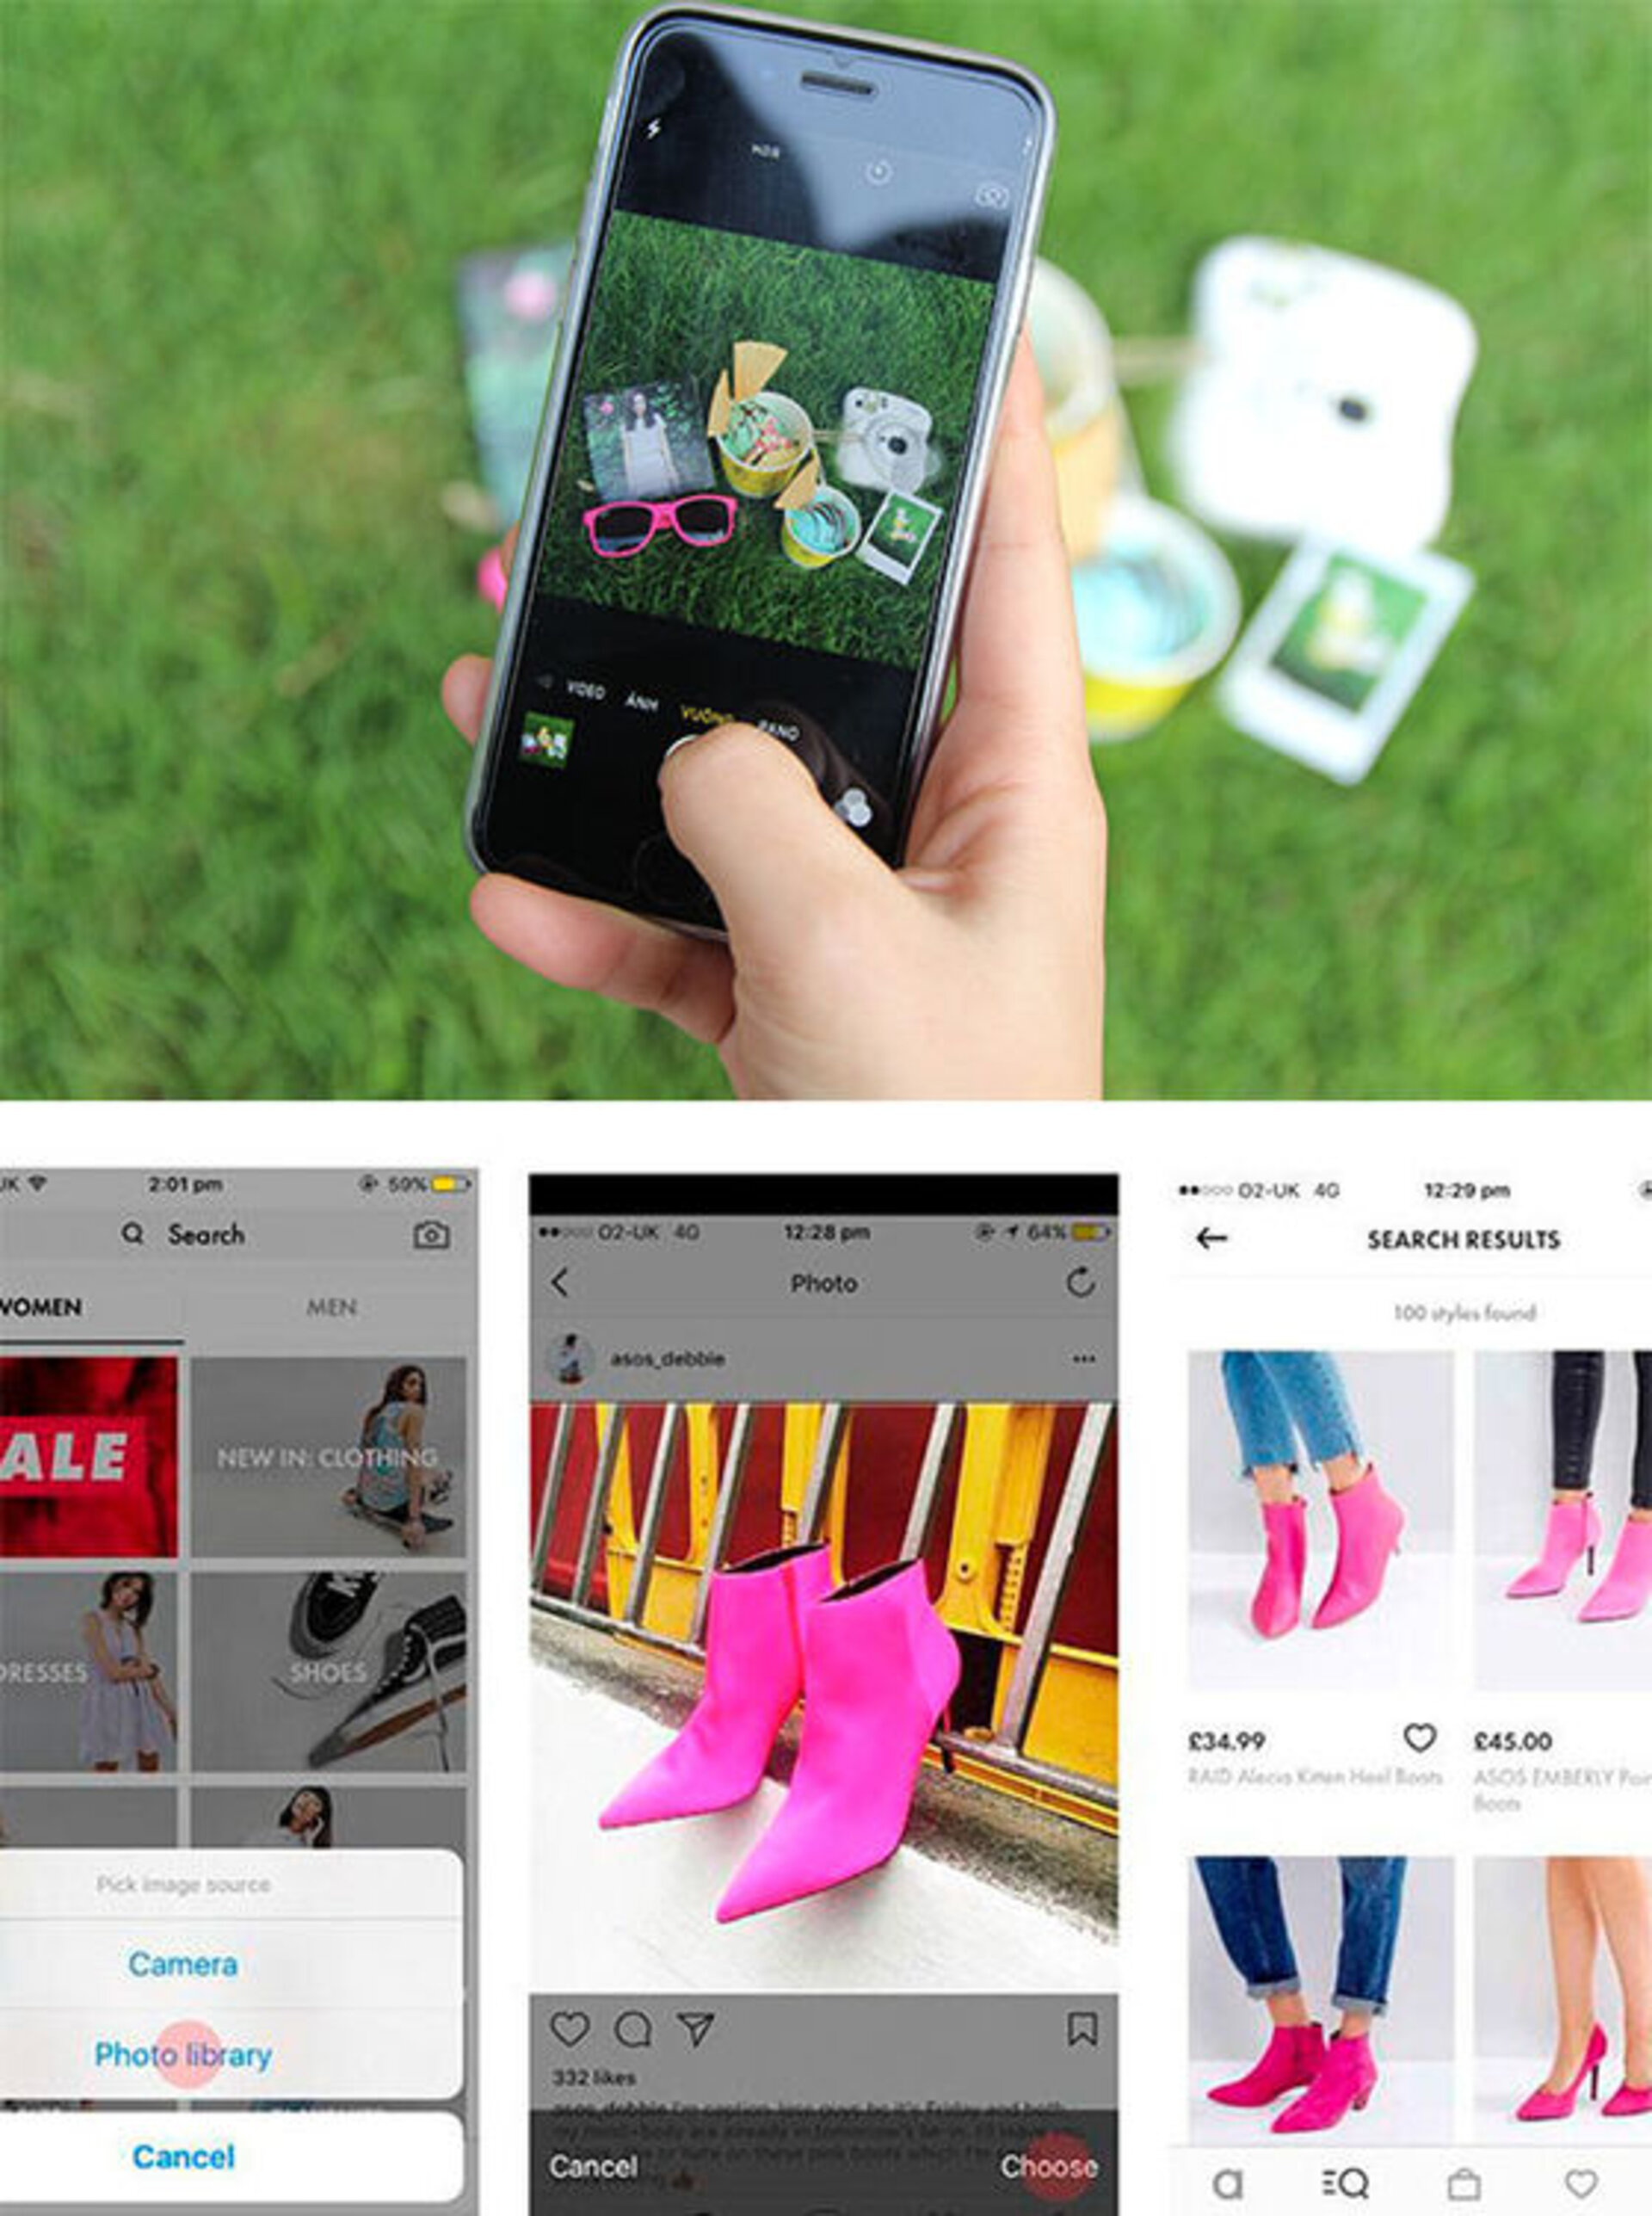 Picture recognition becomes the personal shopper